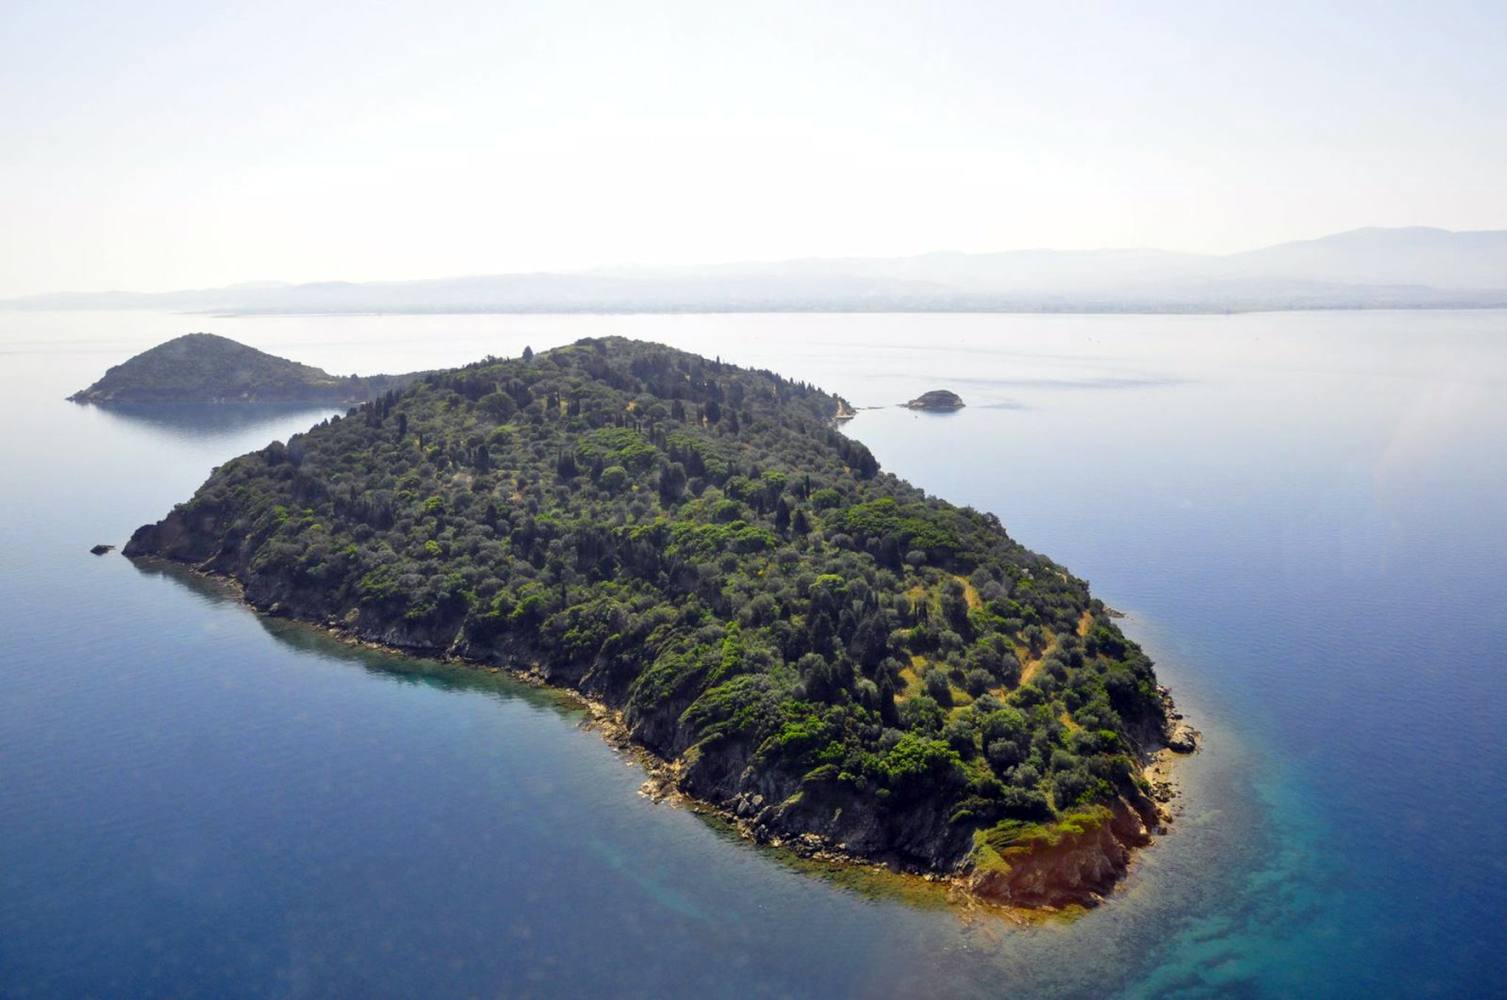 Private Islands for rent - Silver Island - Greece - Europe: Mediterranean